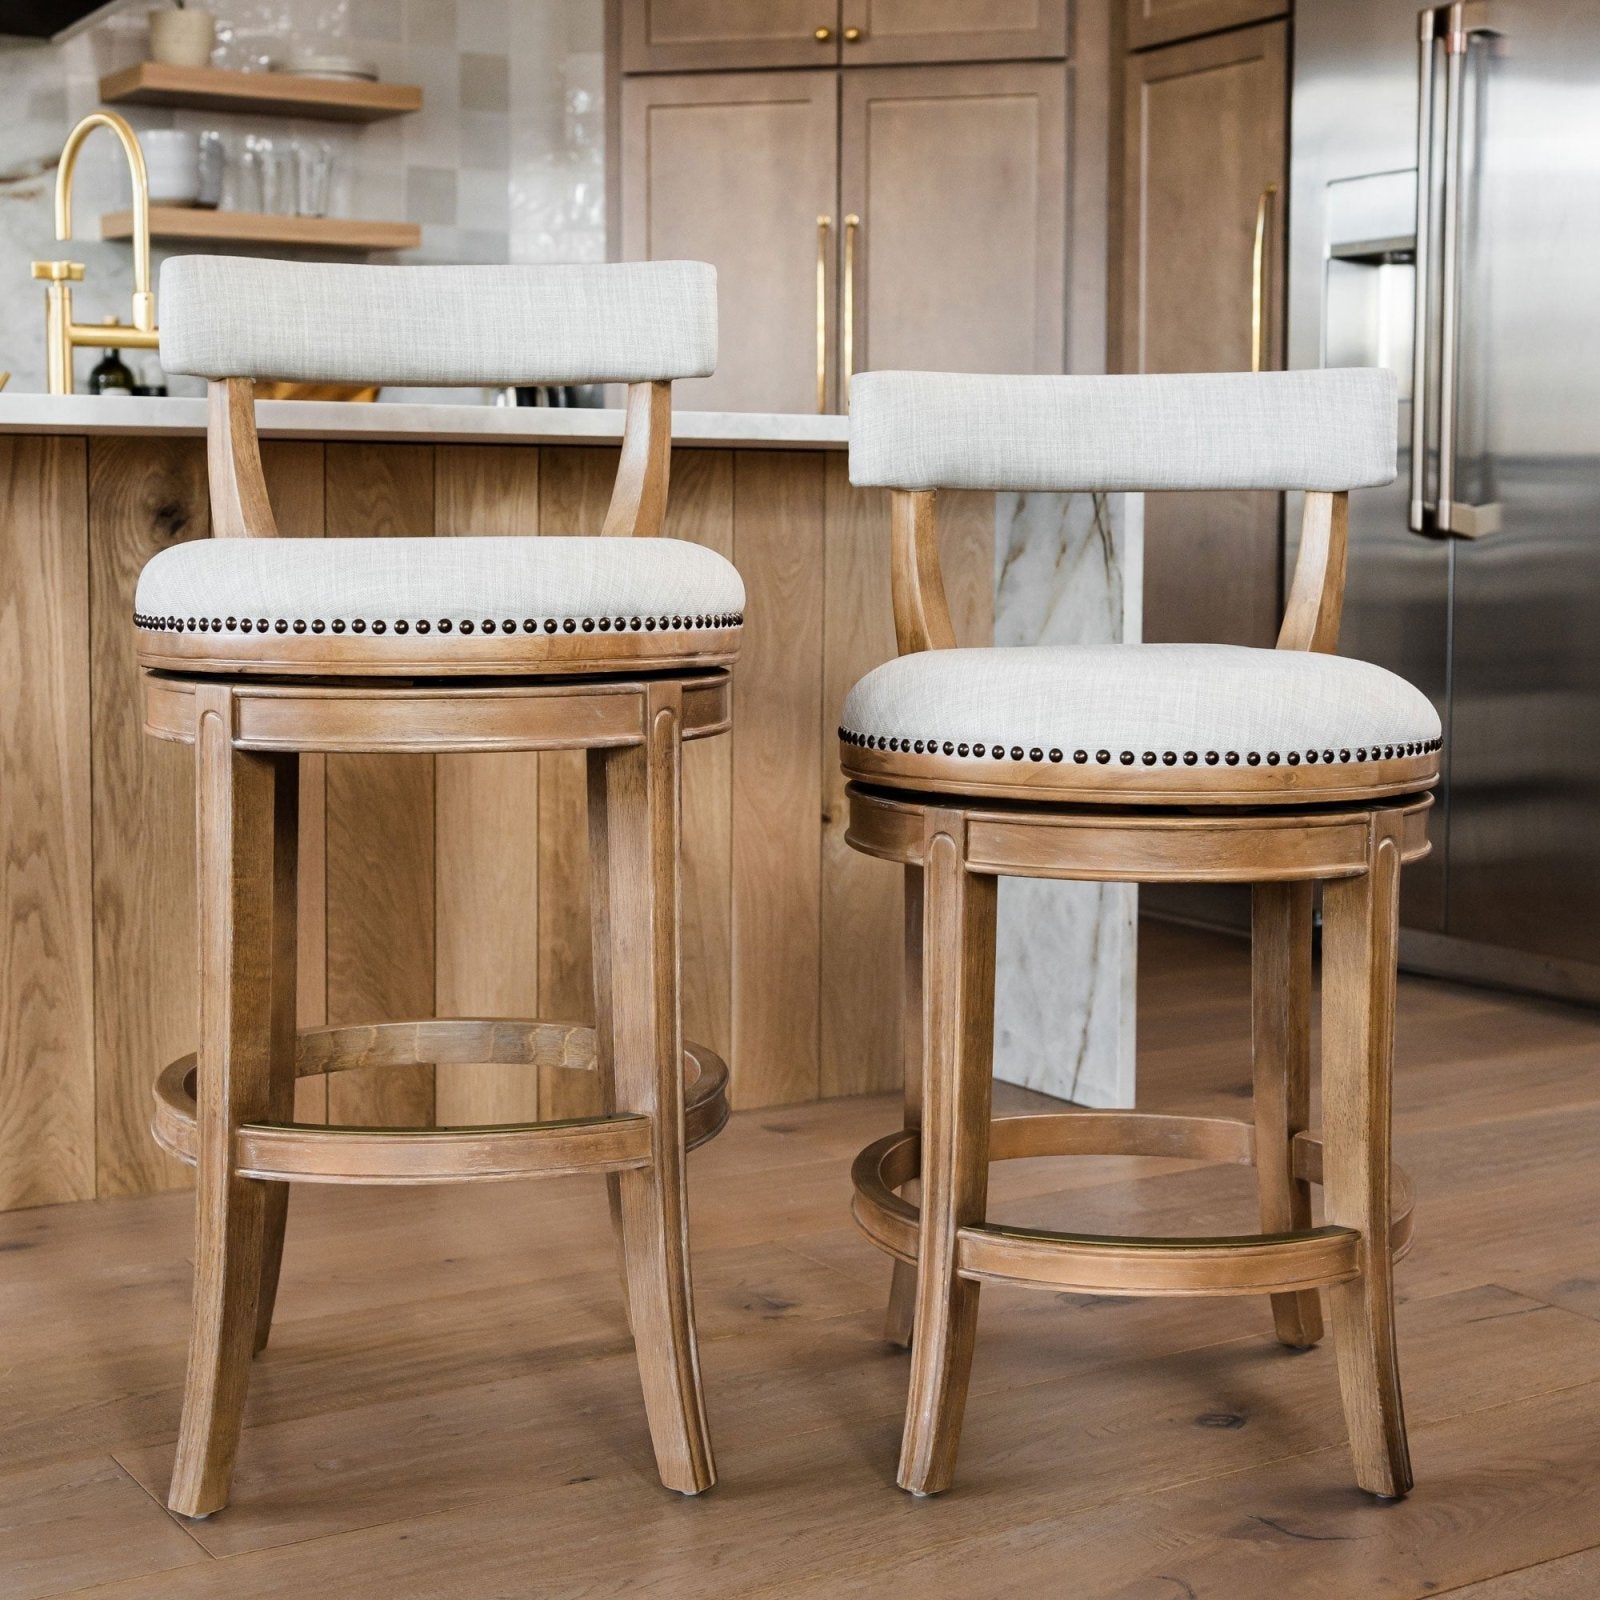 Alexander Counter Stool in Weathered Oak Finish with Sand Color Fabric Upholstery in Stools by Maven Lane